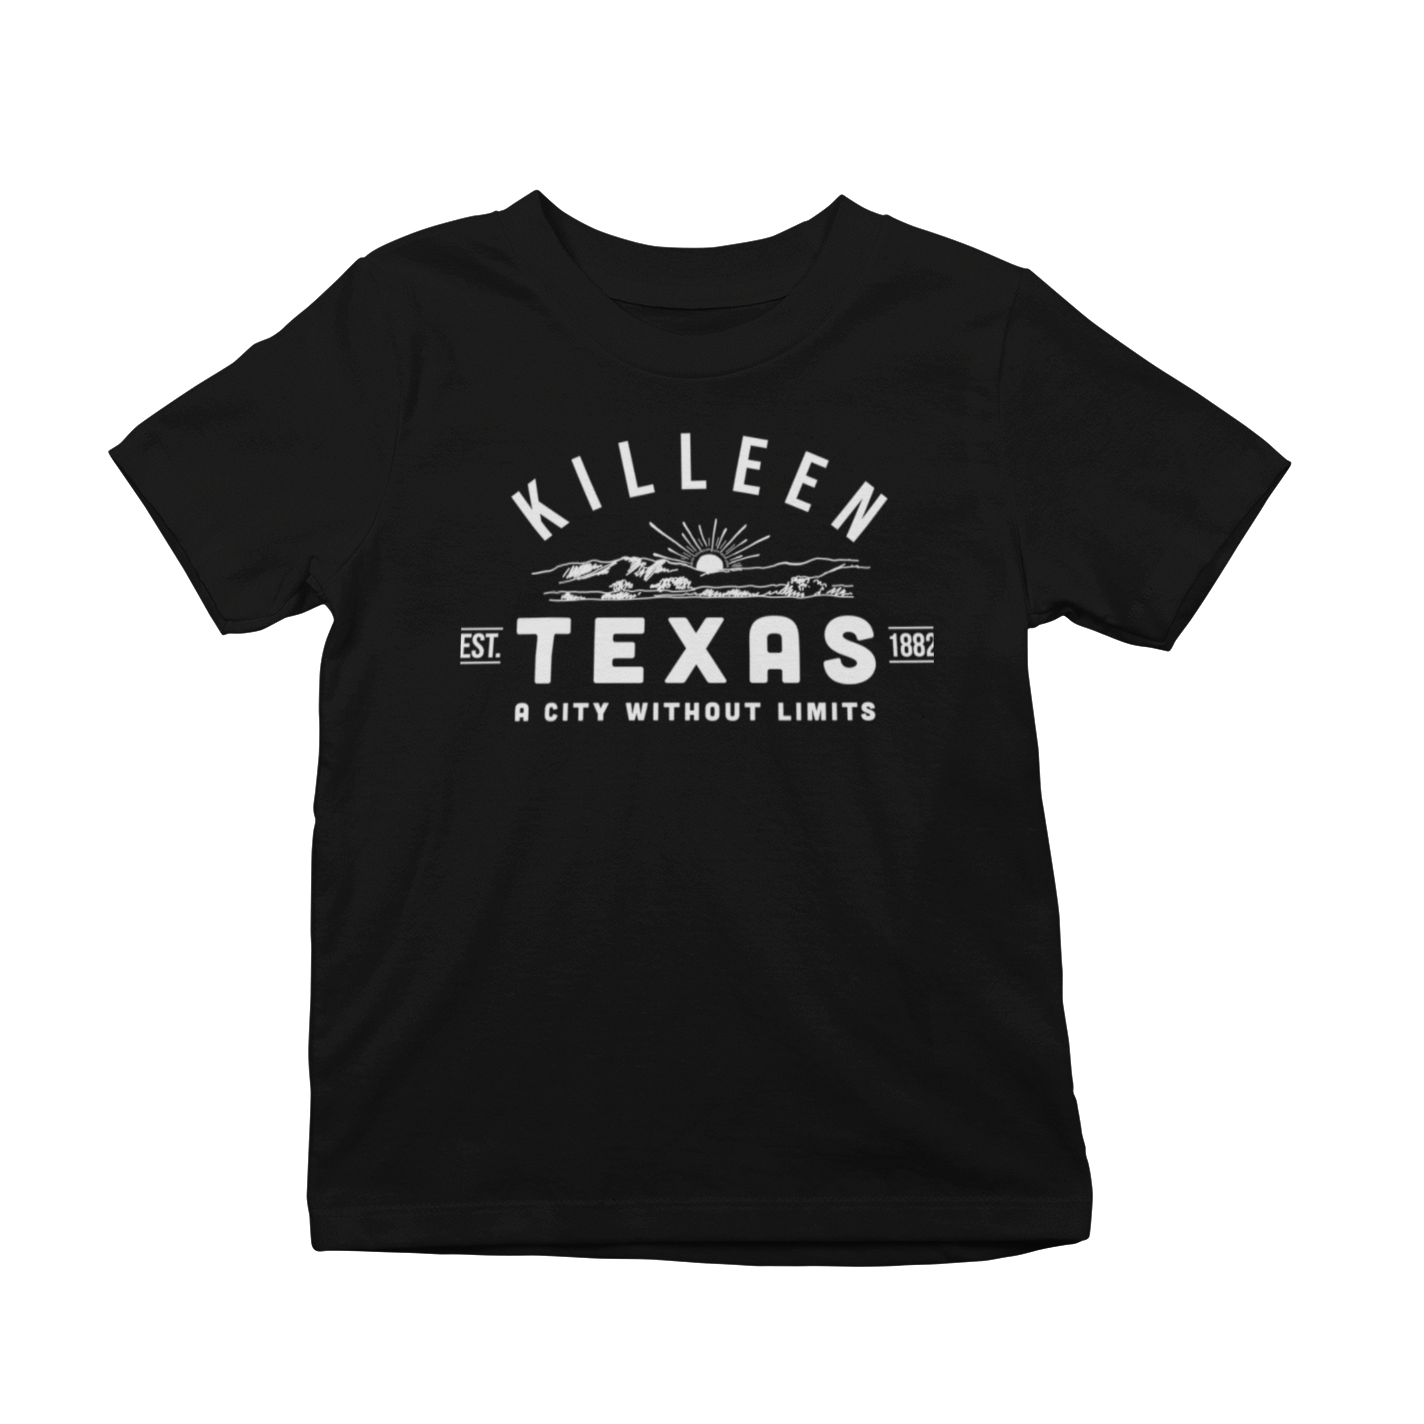 Killeen Texas Toddler T-shirt - Without Limits